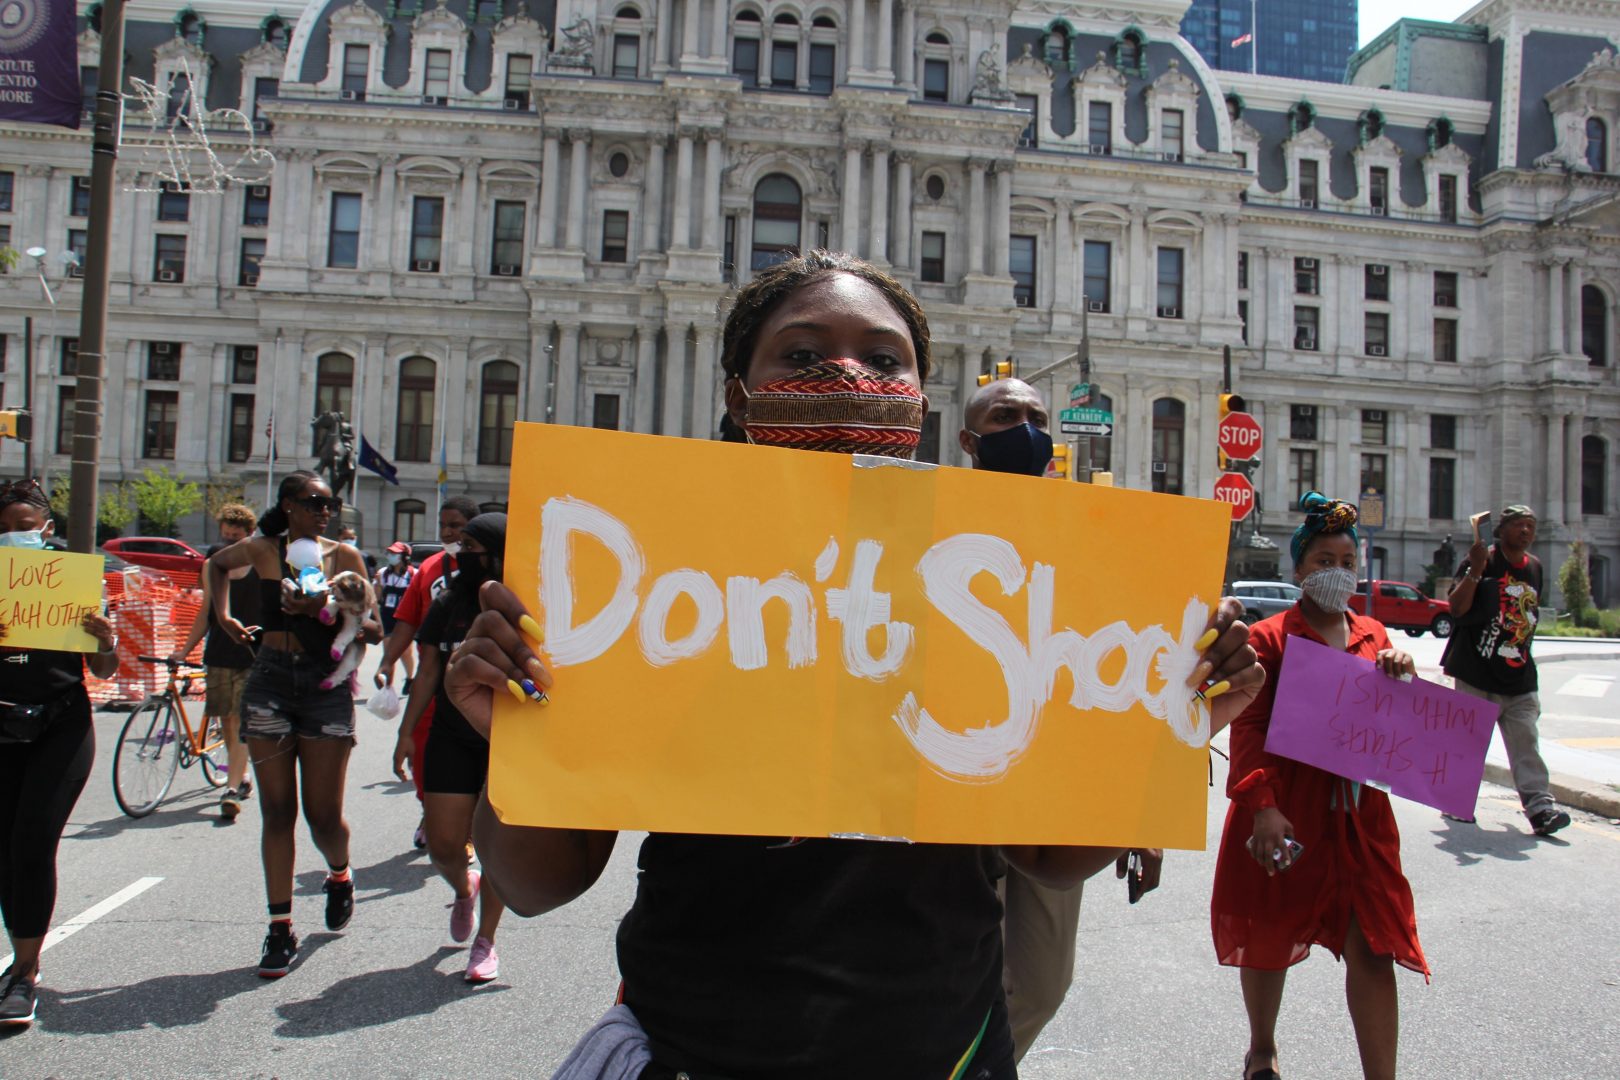 When it comes to its gun violence epidemic, Philly is